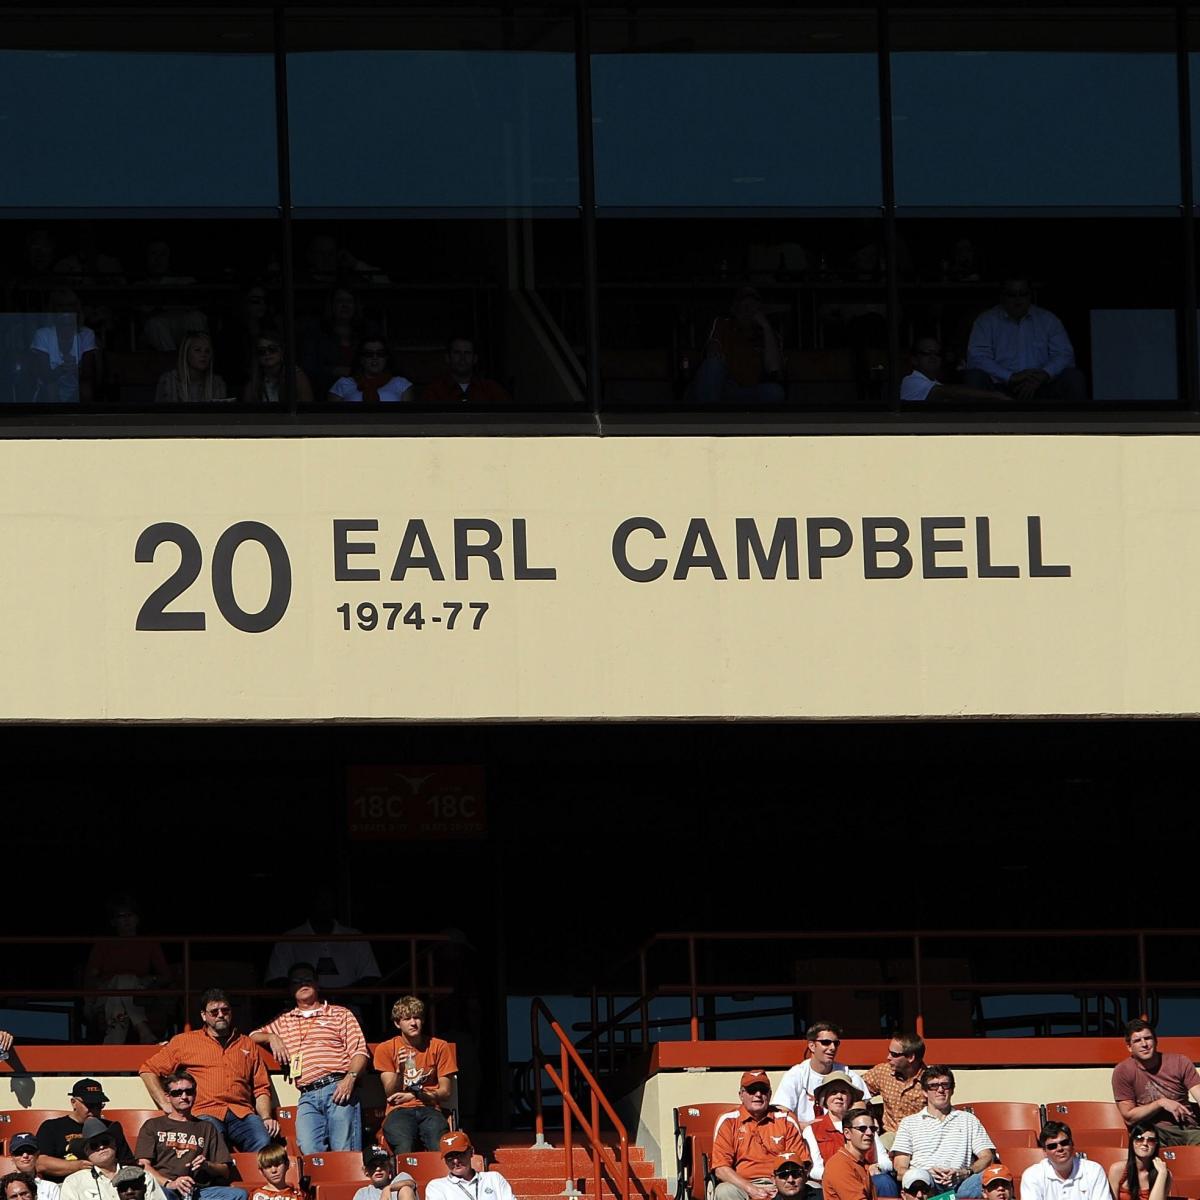 Earl Campbell #3 Power Back of all time. 